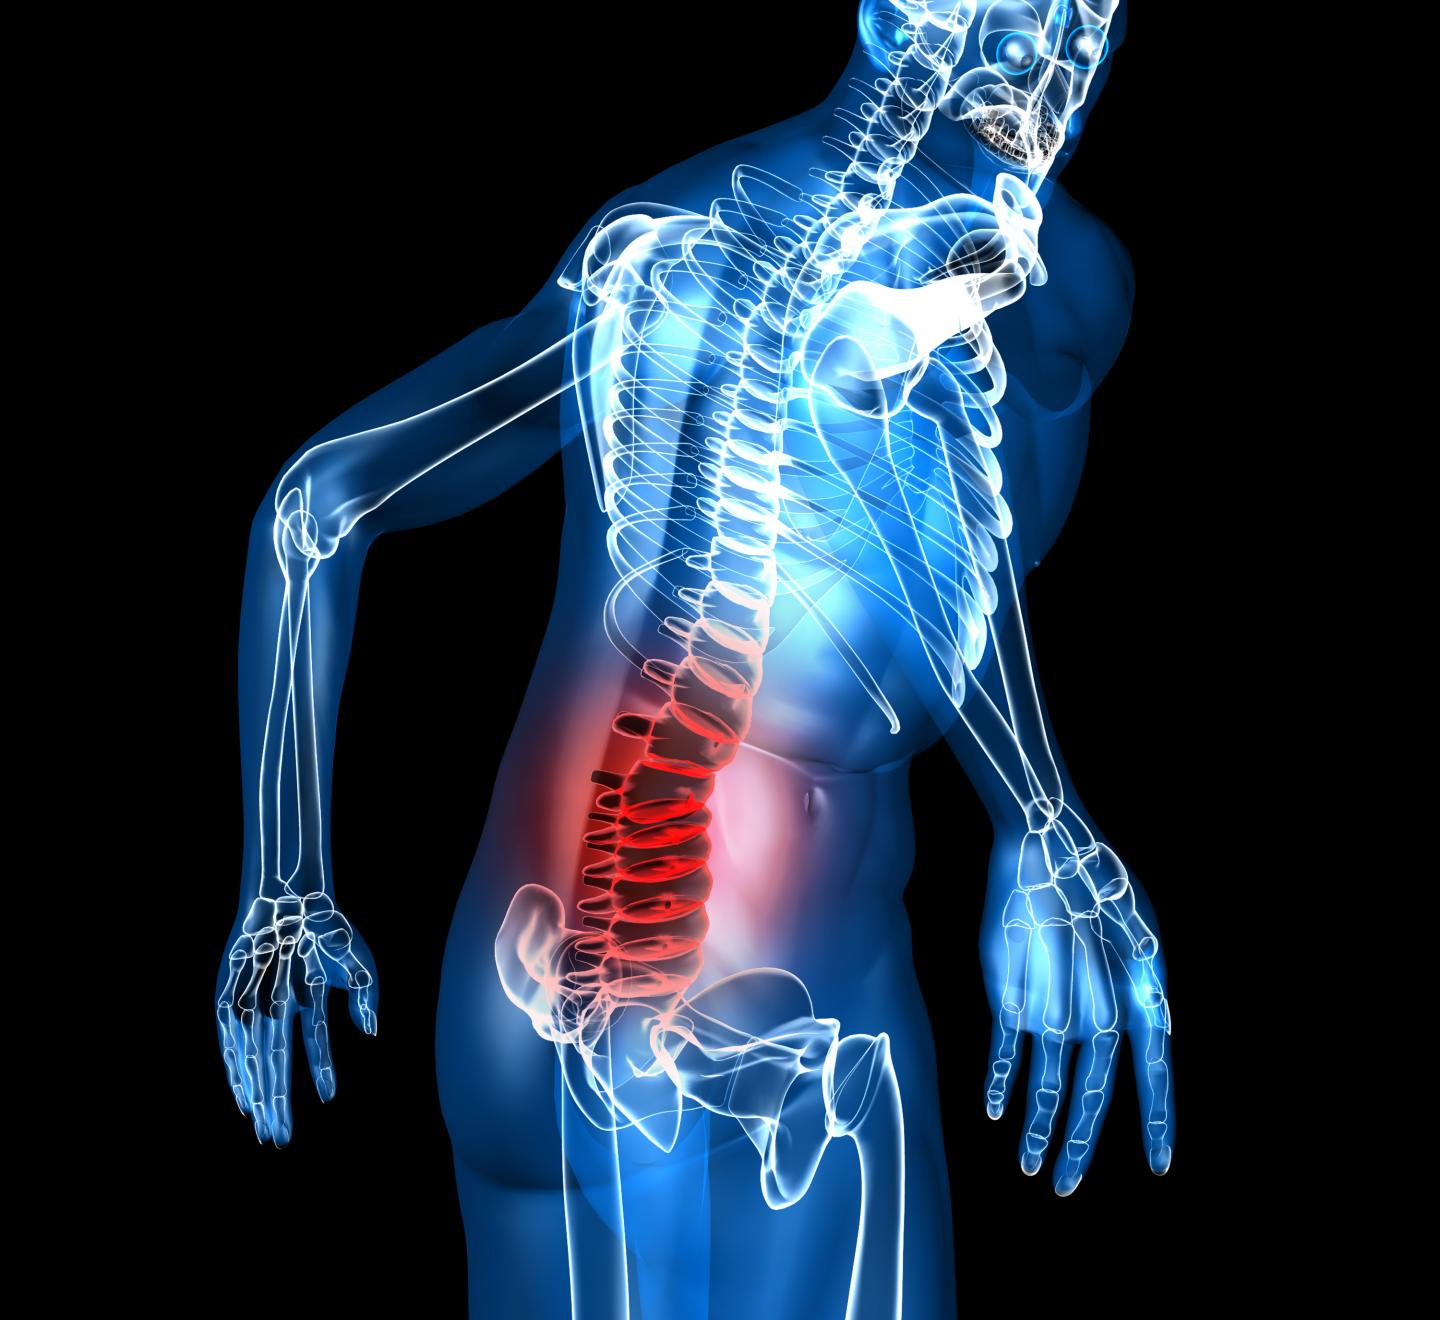 Lower Back Pain Responds Equally to Placebo and Diazepam